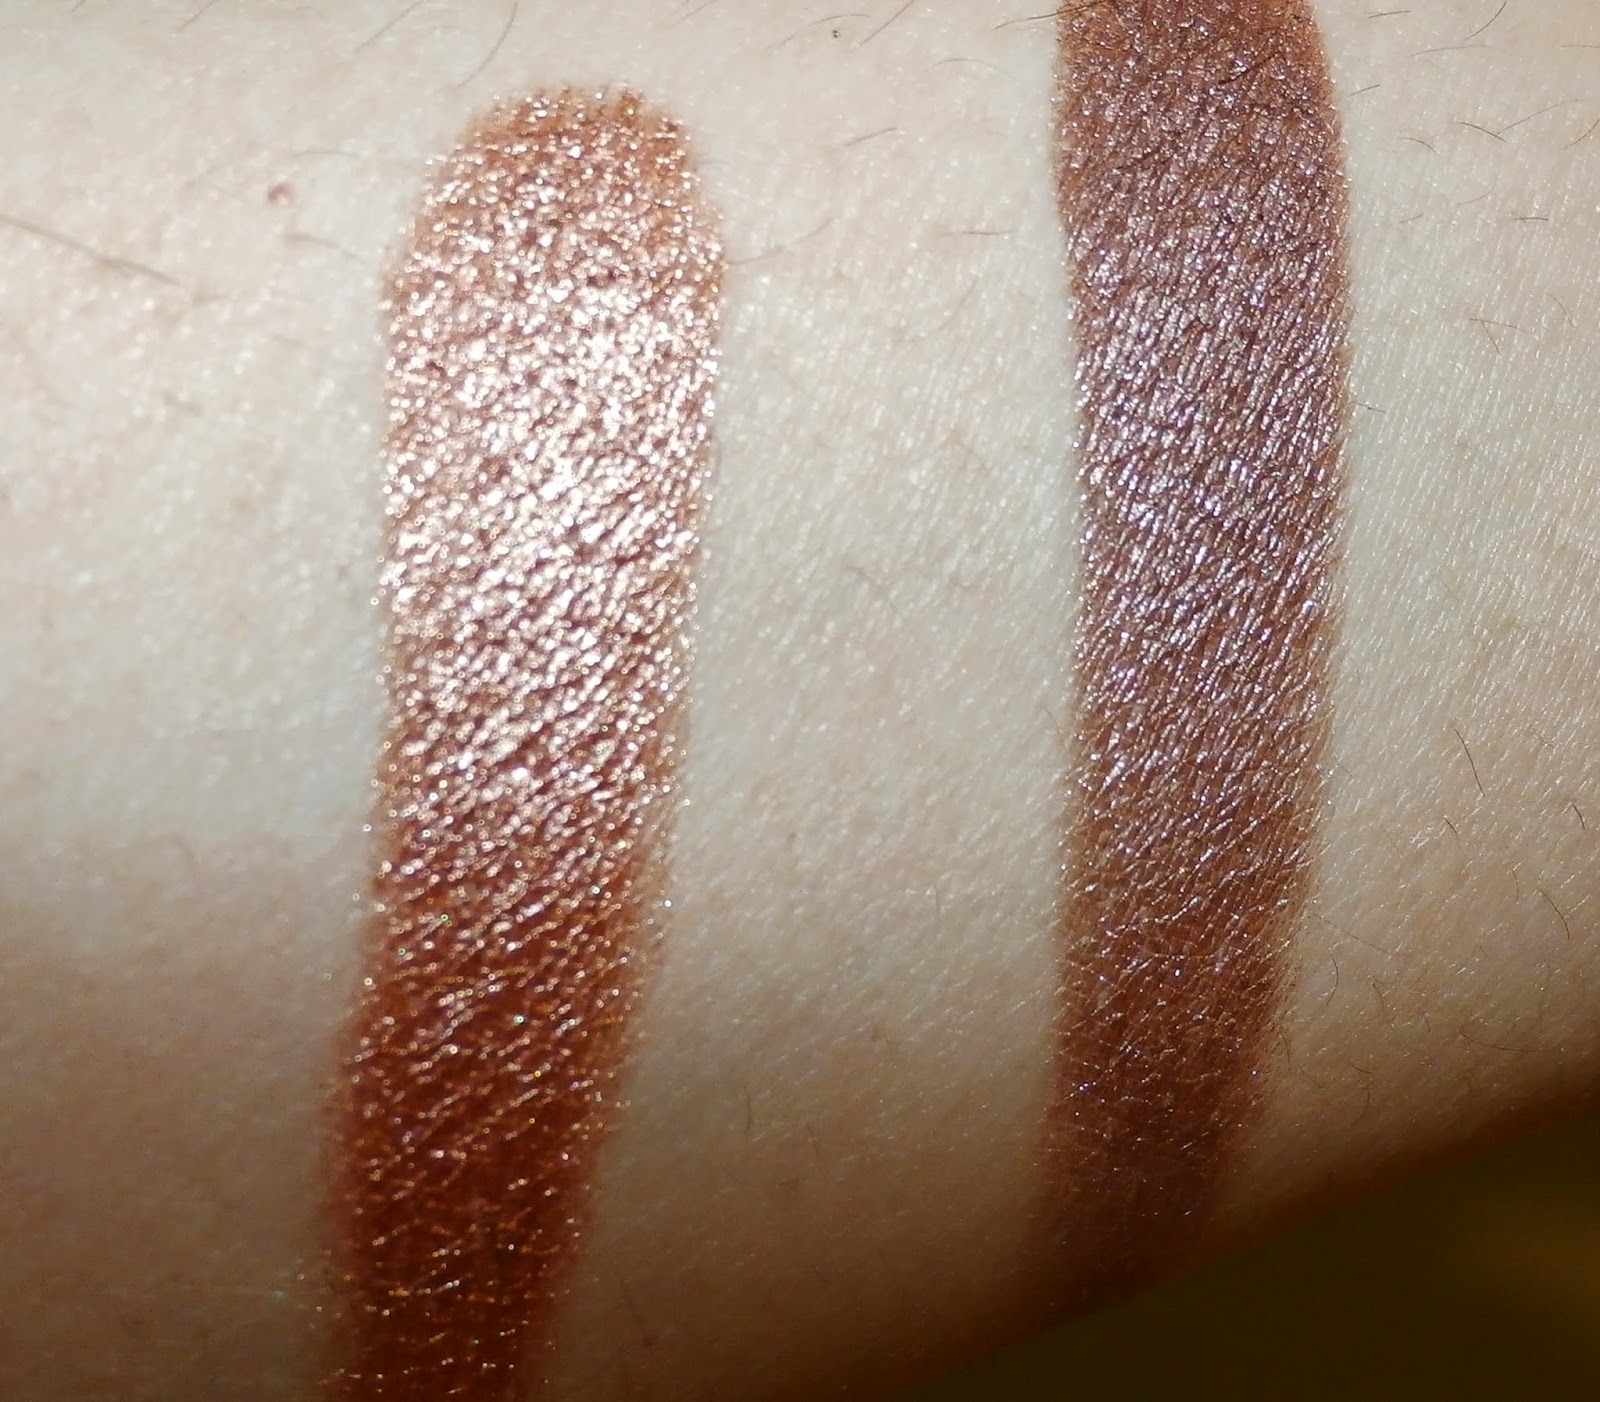 My Makeup Issues: Makeup Geek (MUG) Foiled Eyeshadows in Grandstand and Mesmerized - Review Swatches